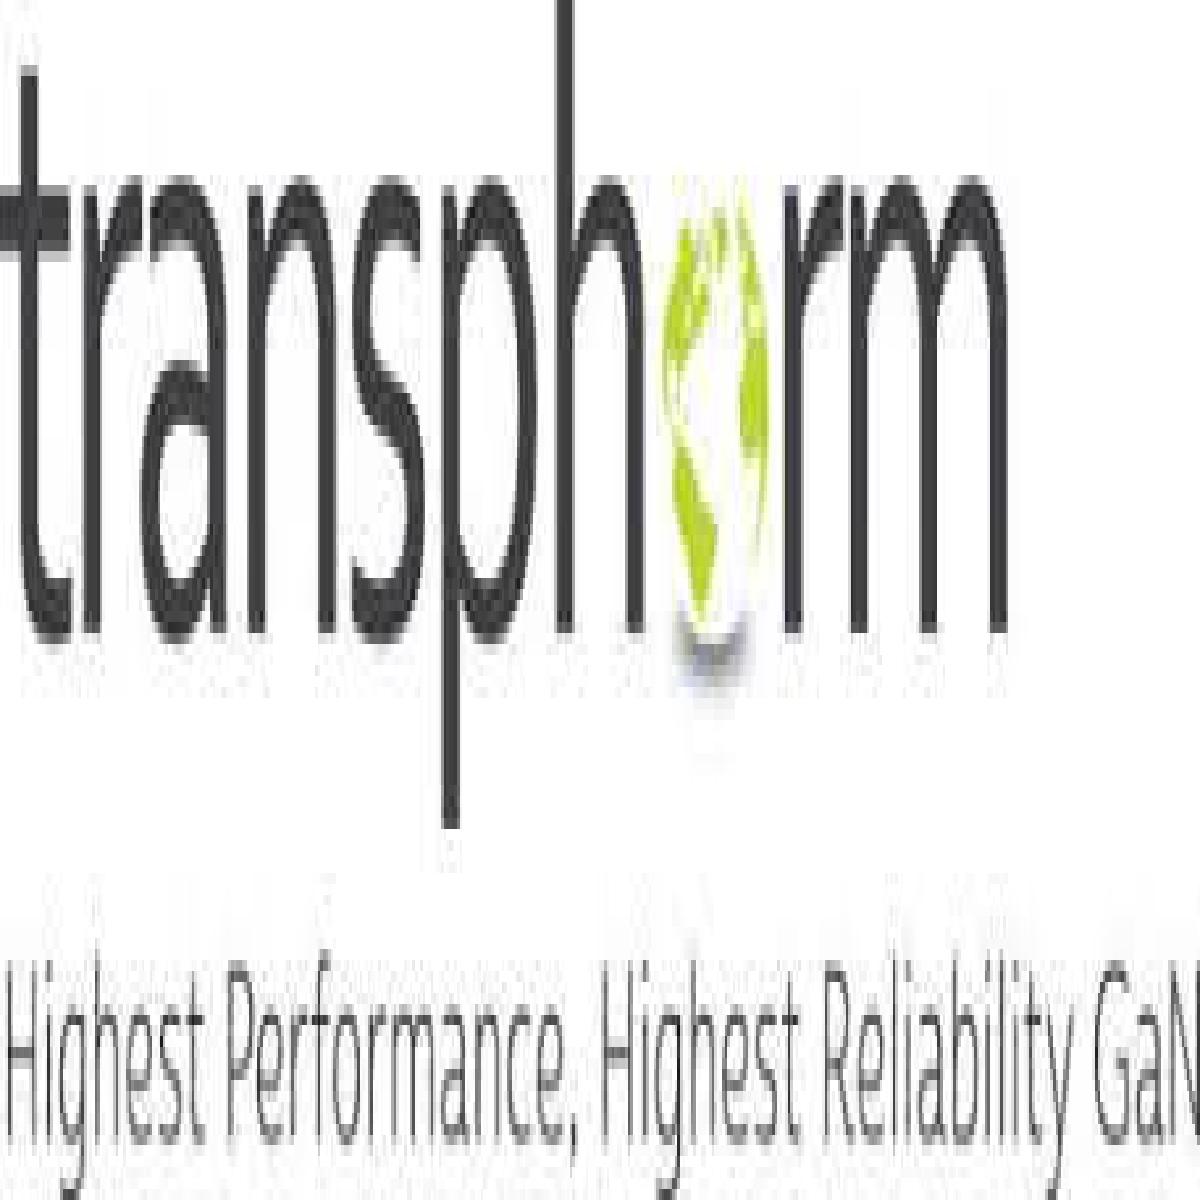 Transphorm Releases New GaN FET Reliability Ratings, Now Segmented by Power Level